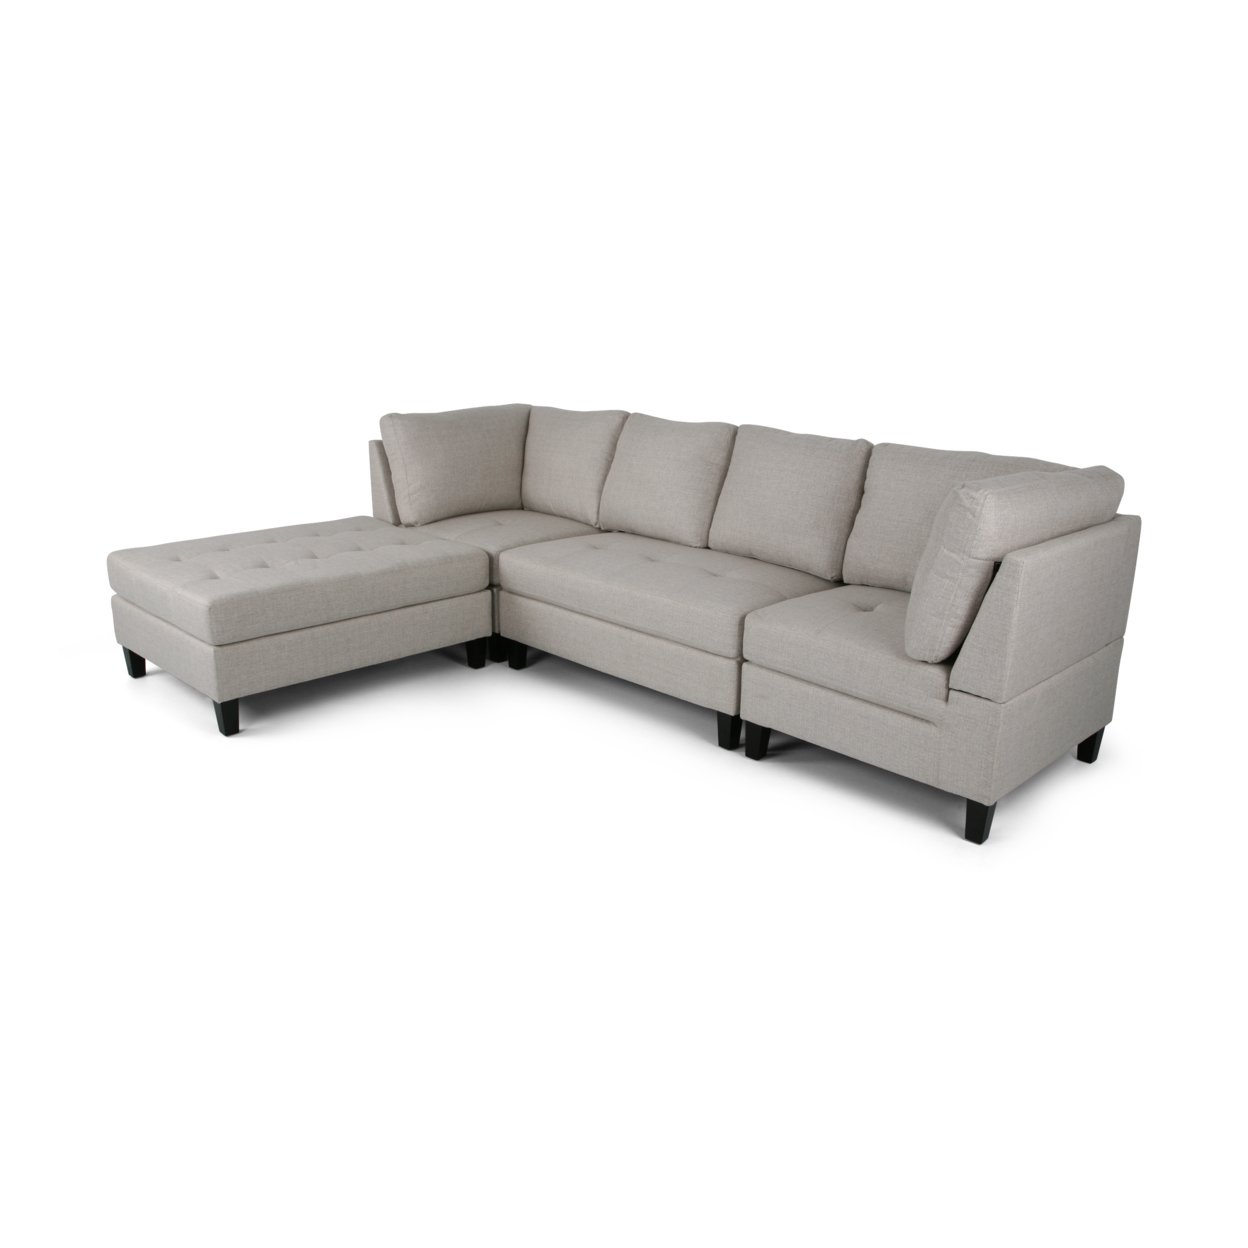 Kimberley Contemporary Fabric Sectional Sofa With Ottoman - Beige + Dark Brown